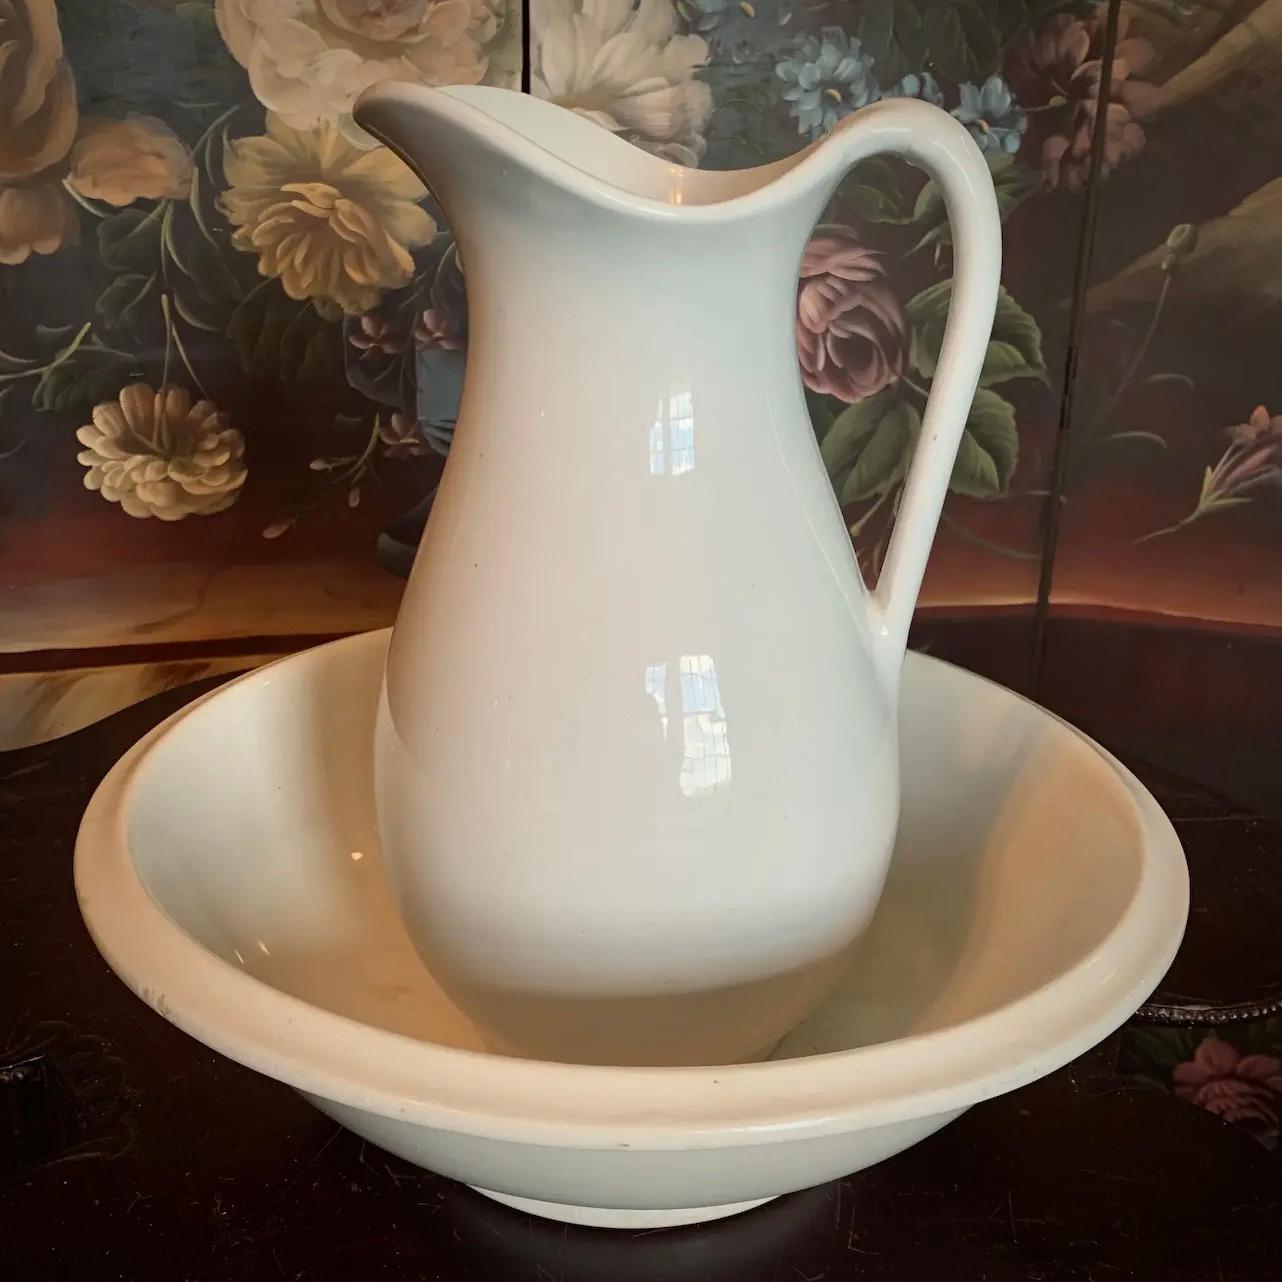 A classic Powell & Bishop ironstone pitcher with original matching basin. A traditional piece of old world history that is both functional and decorative. Capturing the sought after timeless look of Victorian and rustic décor, this authentic pair is